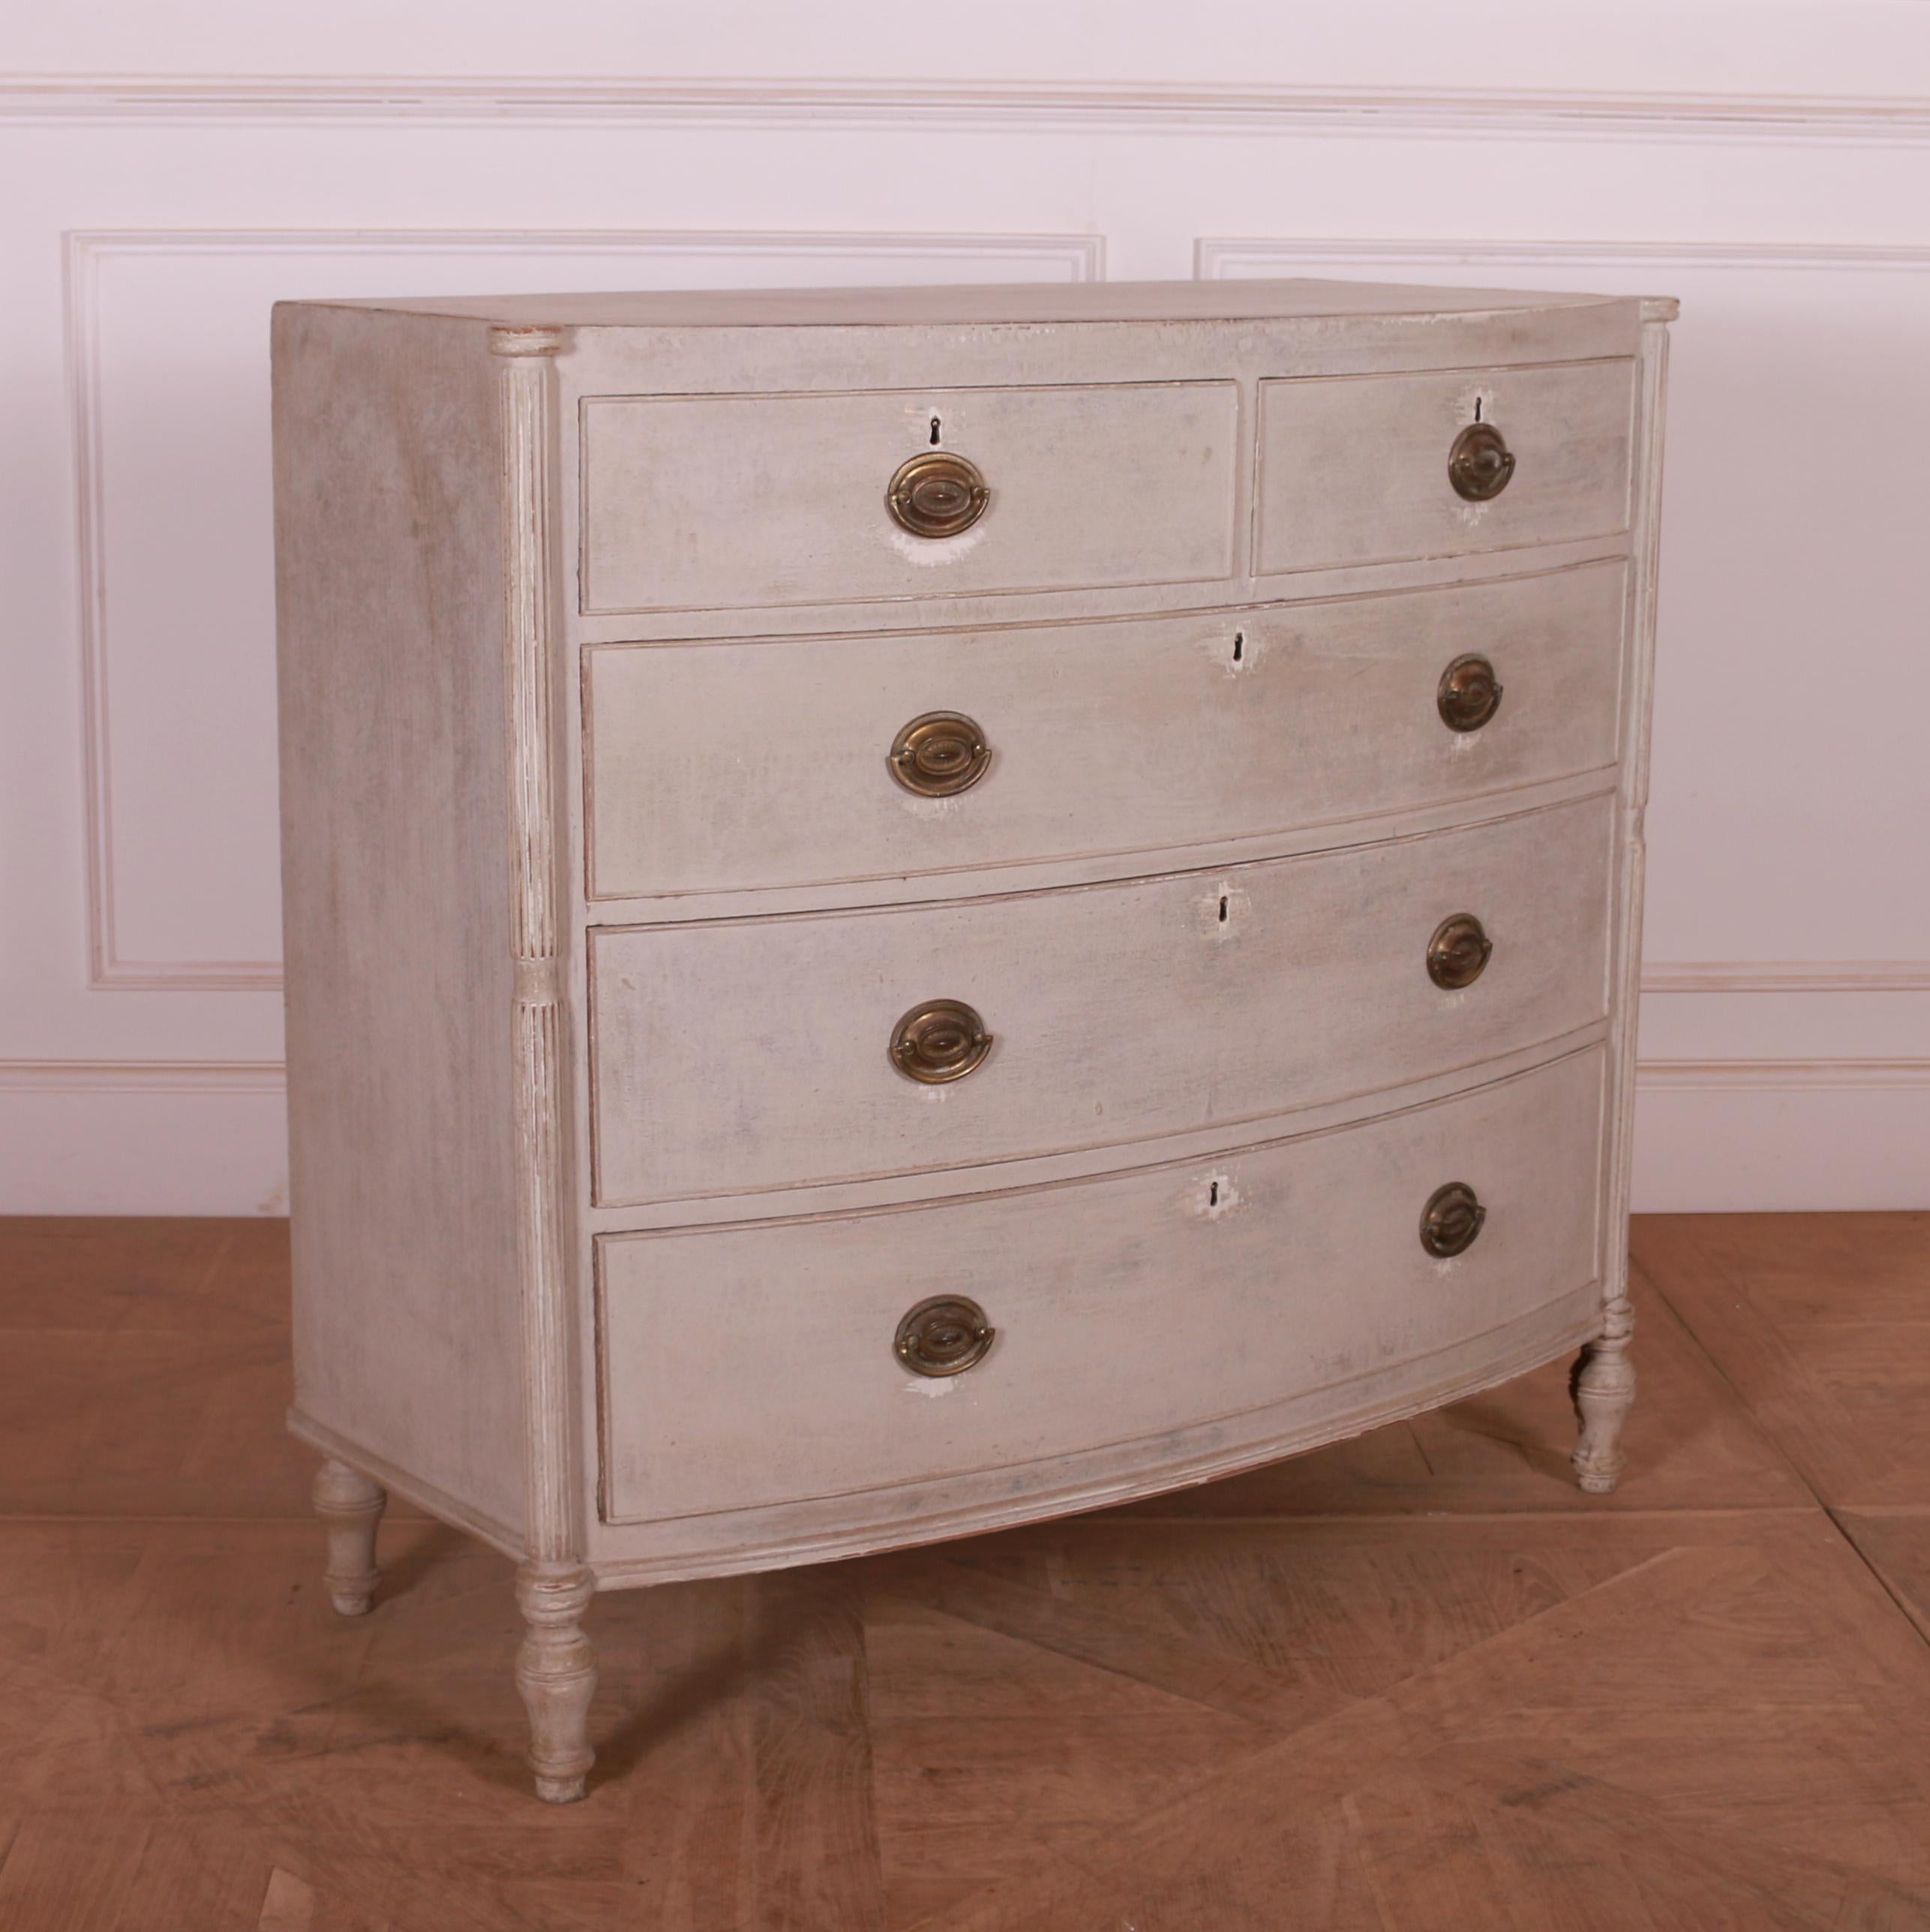 Good early 19th century English painted pine bowfronted chest of drawers. 1830.

Dimensions
44 inches (112 cms) Wide
20 inches (51 cms) Deep
40.5 inches (103 cms) High.

     